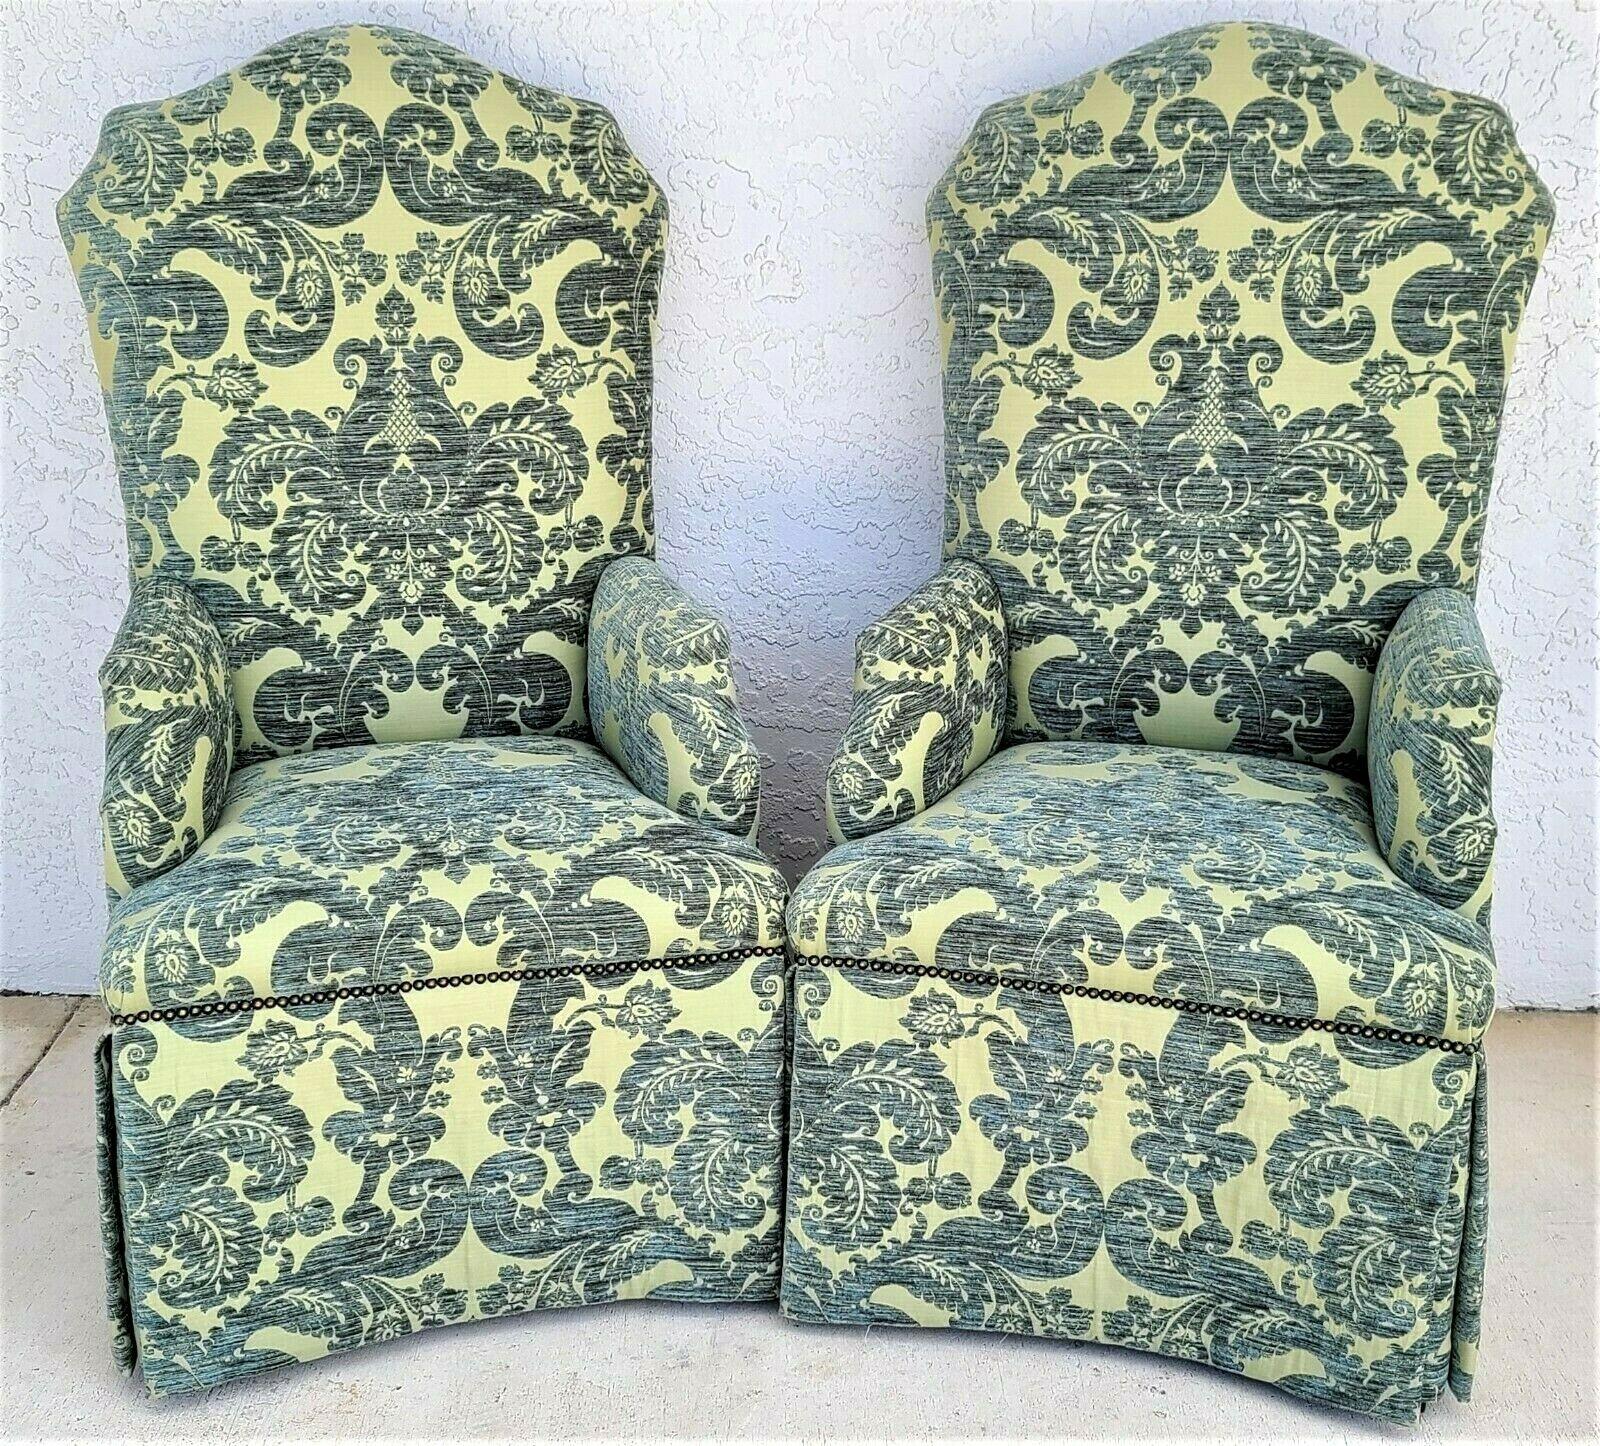 For FULL item description be sure to click on CONTINUE READING at the bottom of this listing.

Pair of Magnificent Burnout Velvet High Back French Nail Studded Dining Host Accent Armchairs

Coloration is blues, greens, and grays and changes